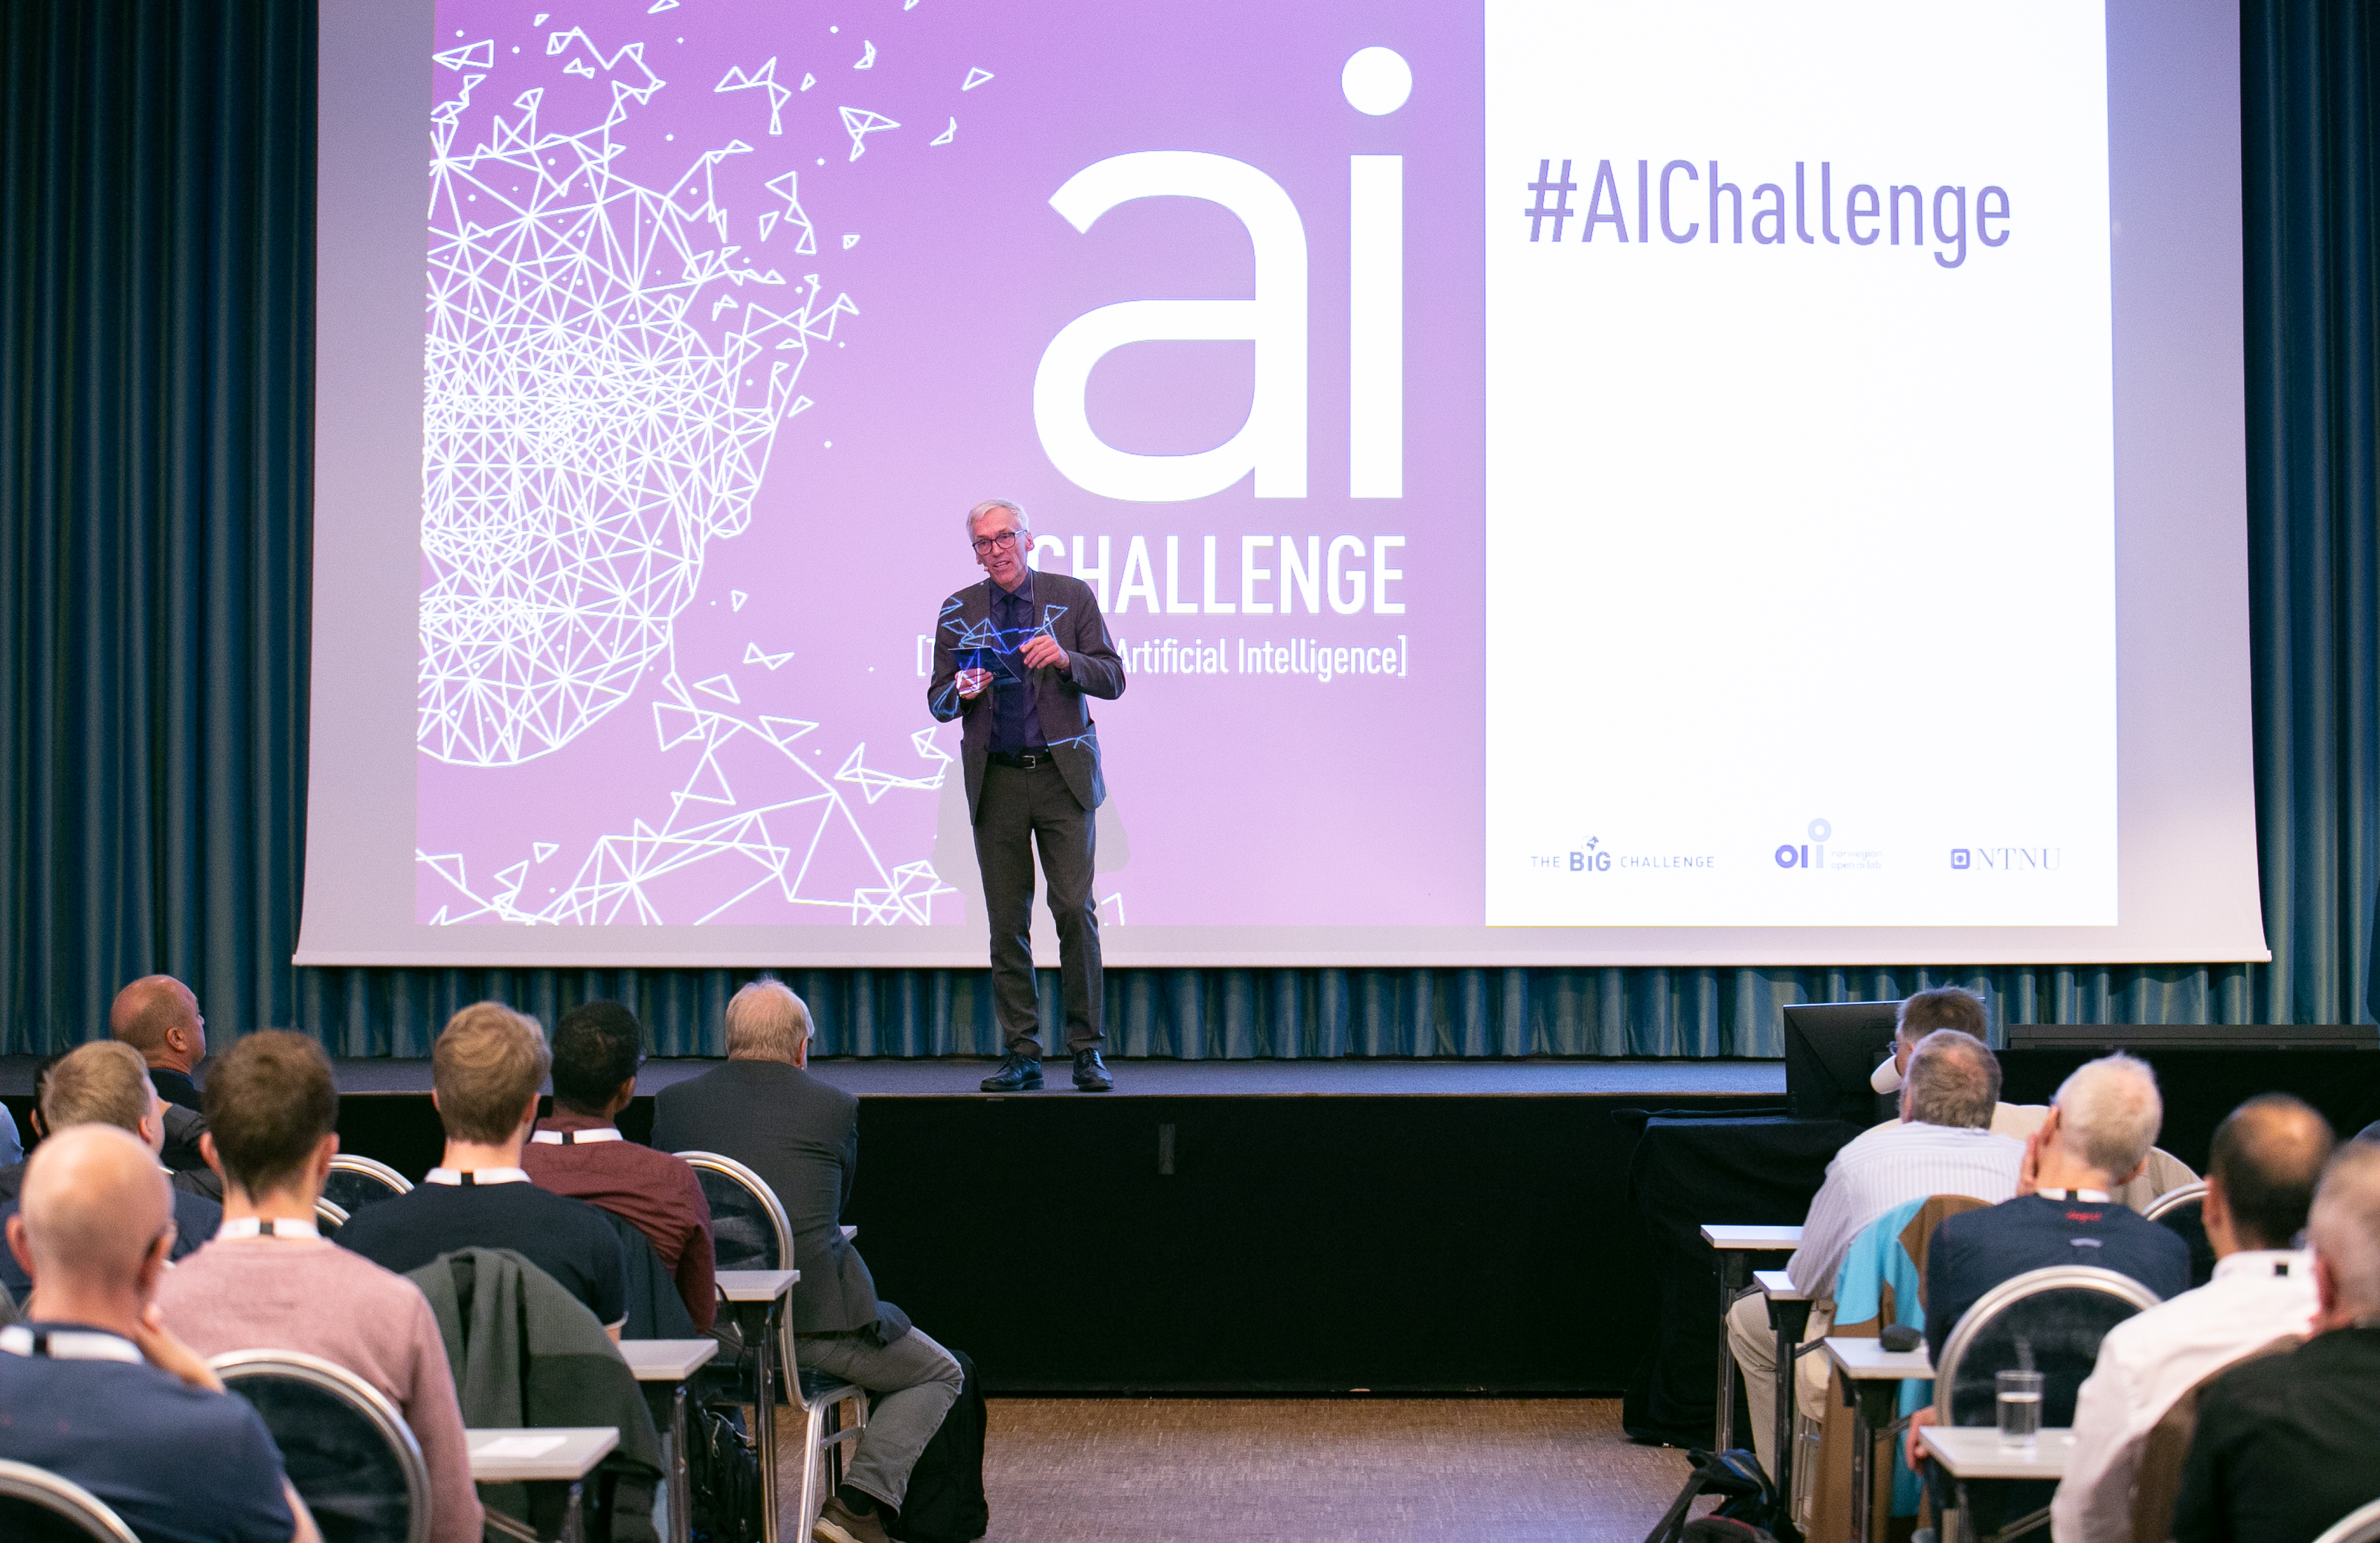 Photo from the AI Challenge conference, by Kai Dragland